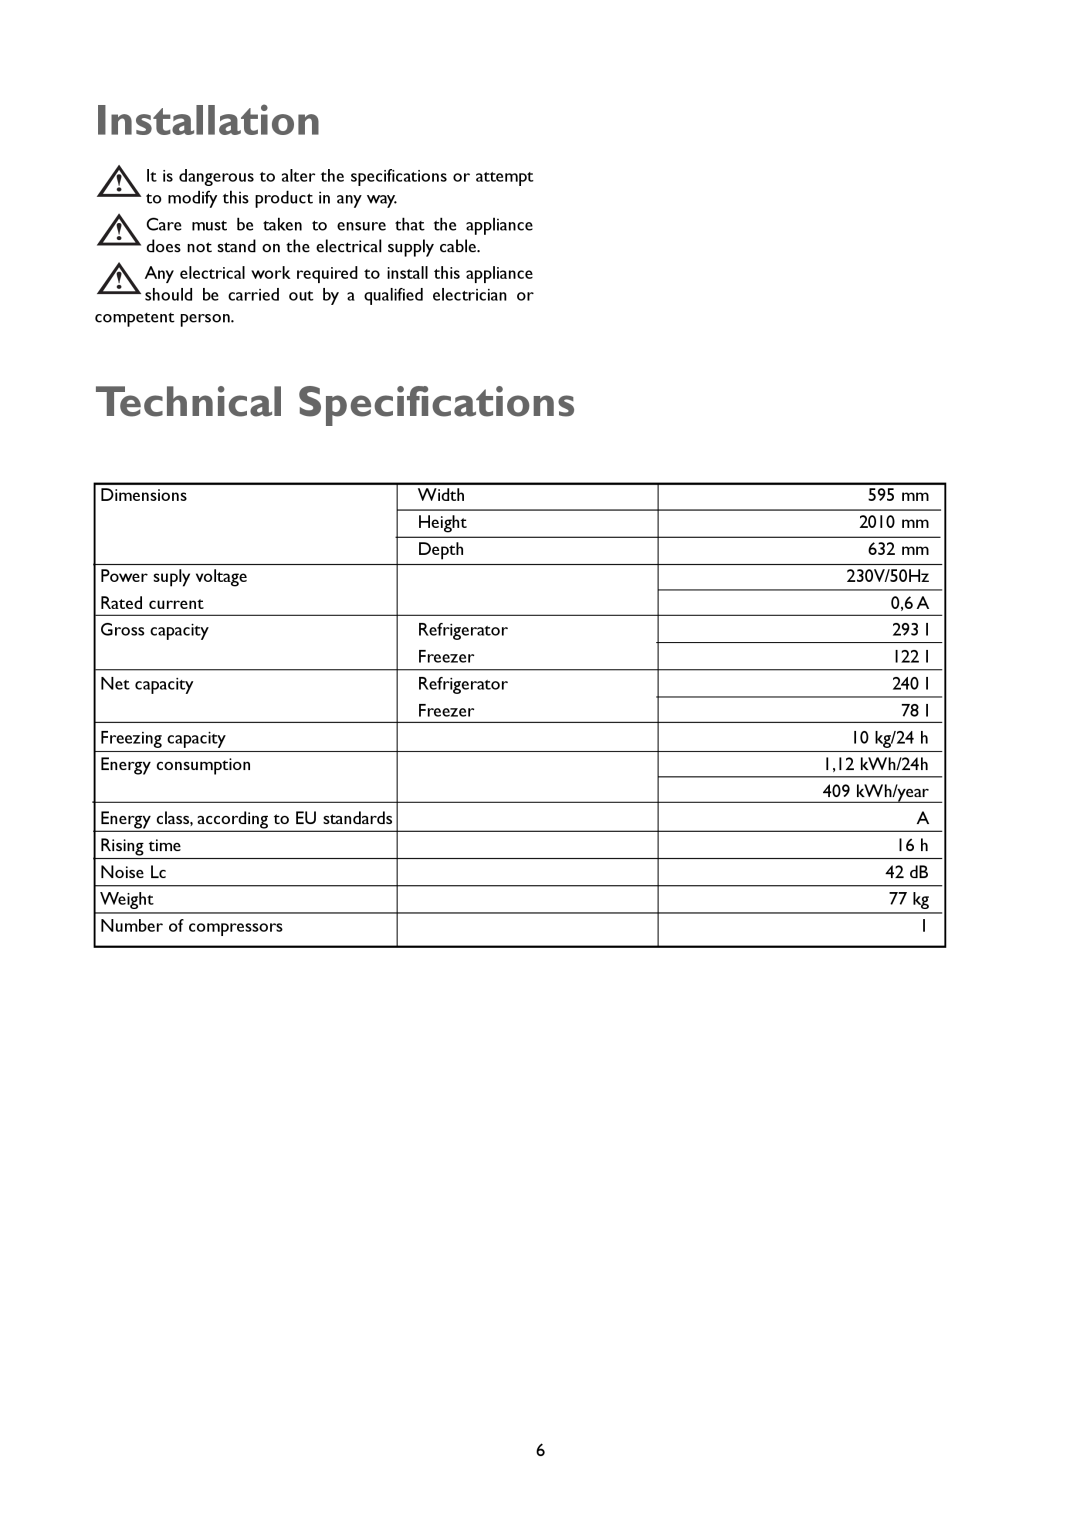 John Lewis JLFFW2005 instruction manual Installation, Technical Specifications 